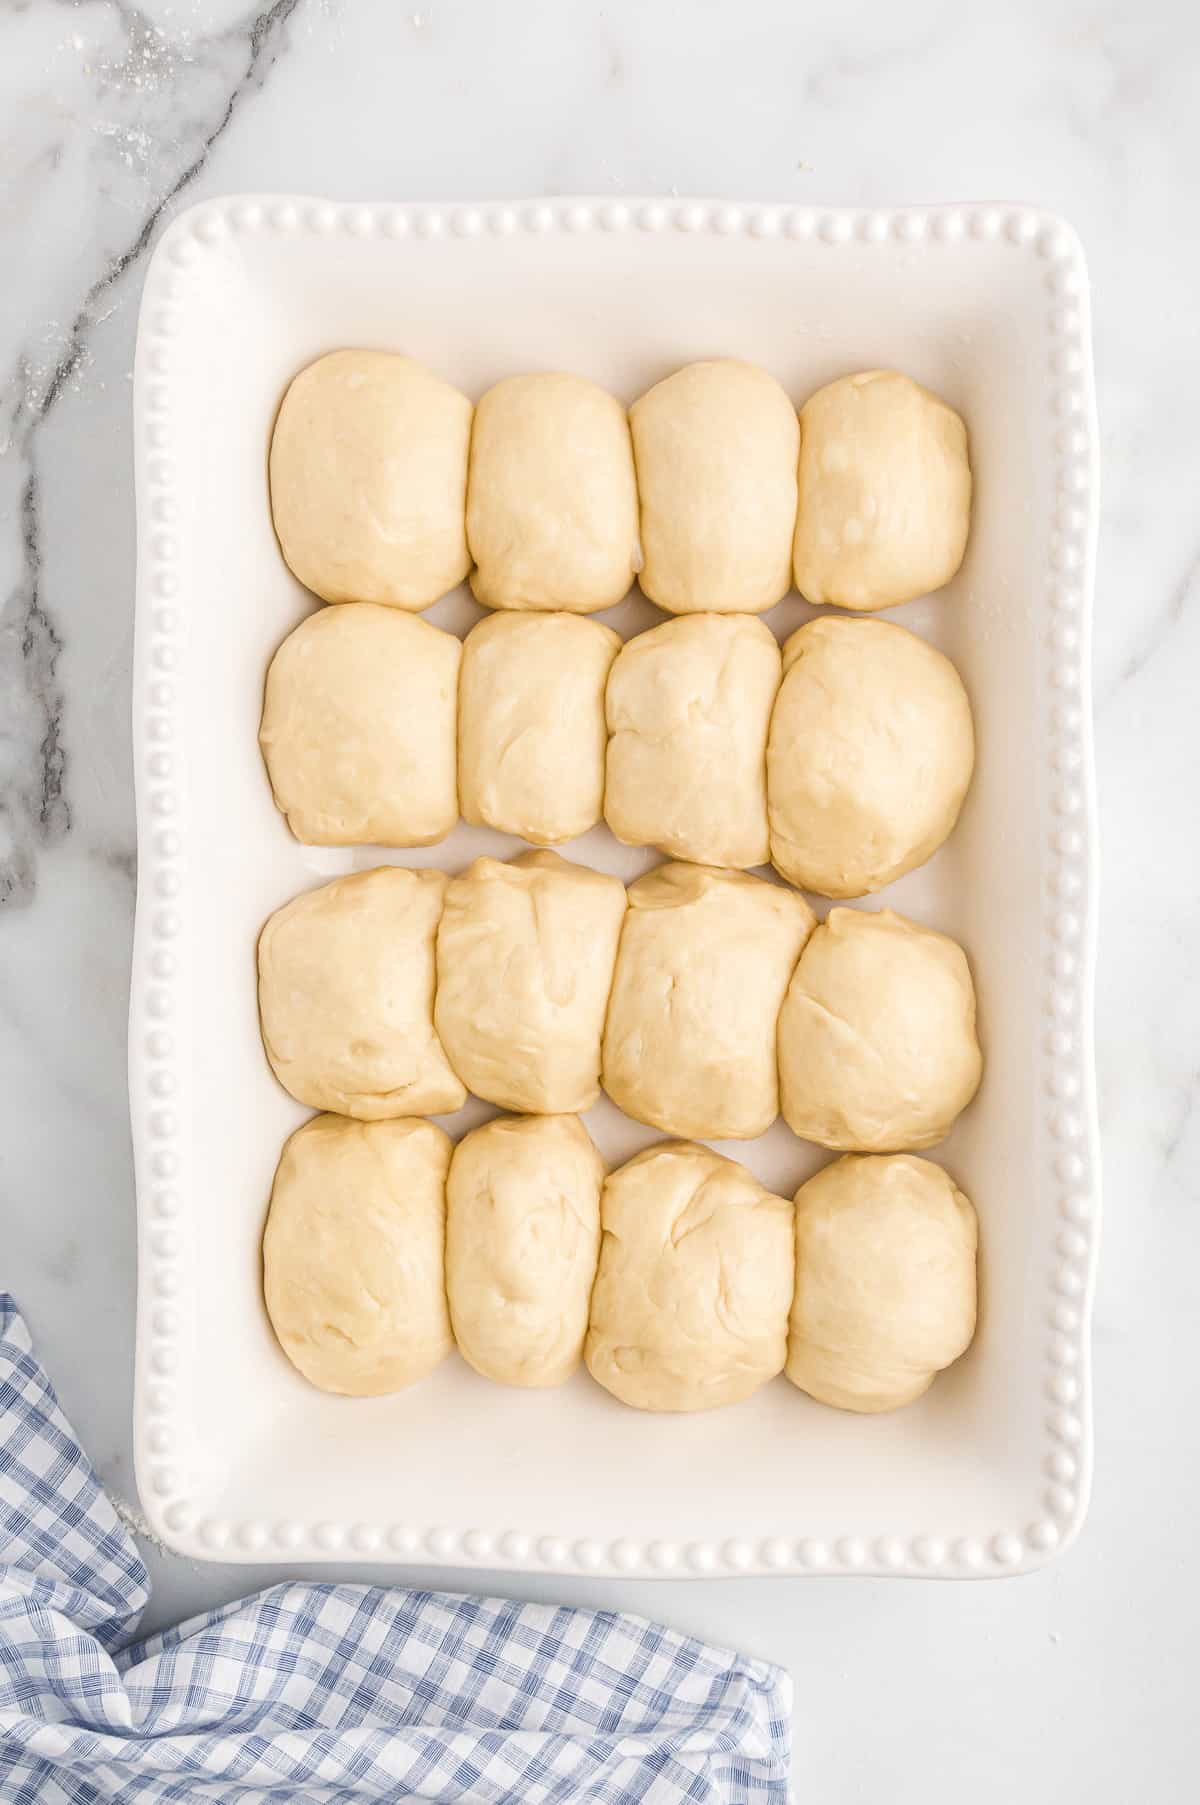 Unbaked potato roll buns in baking dish